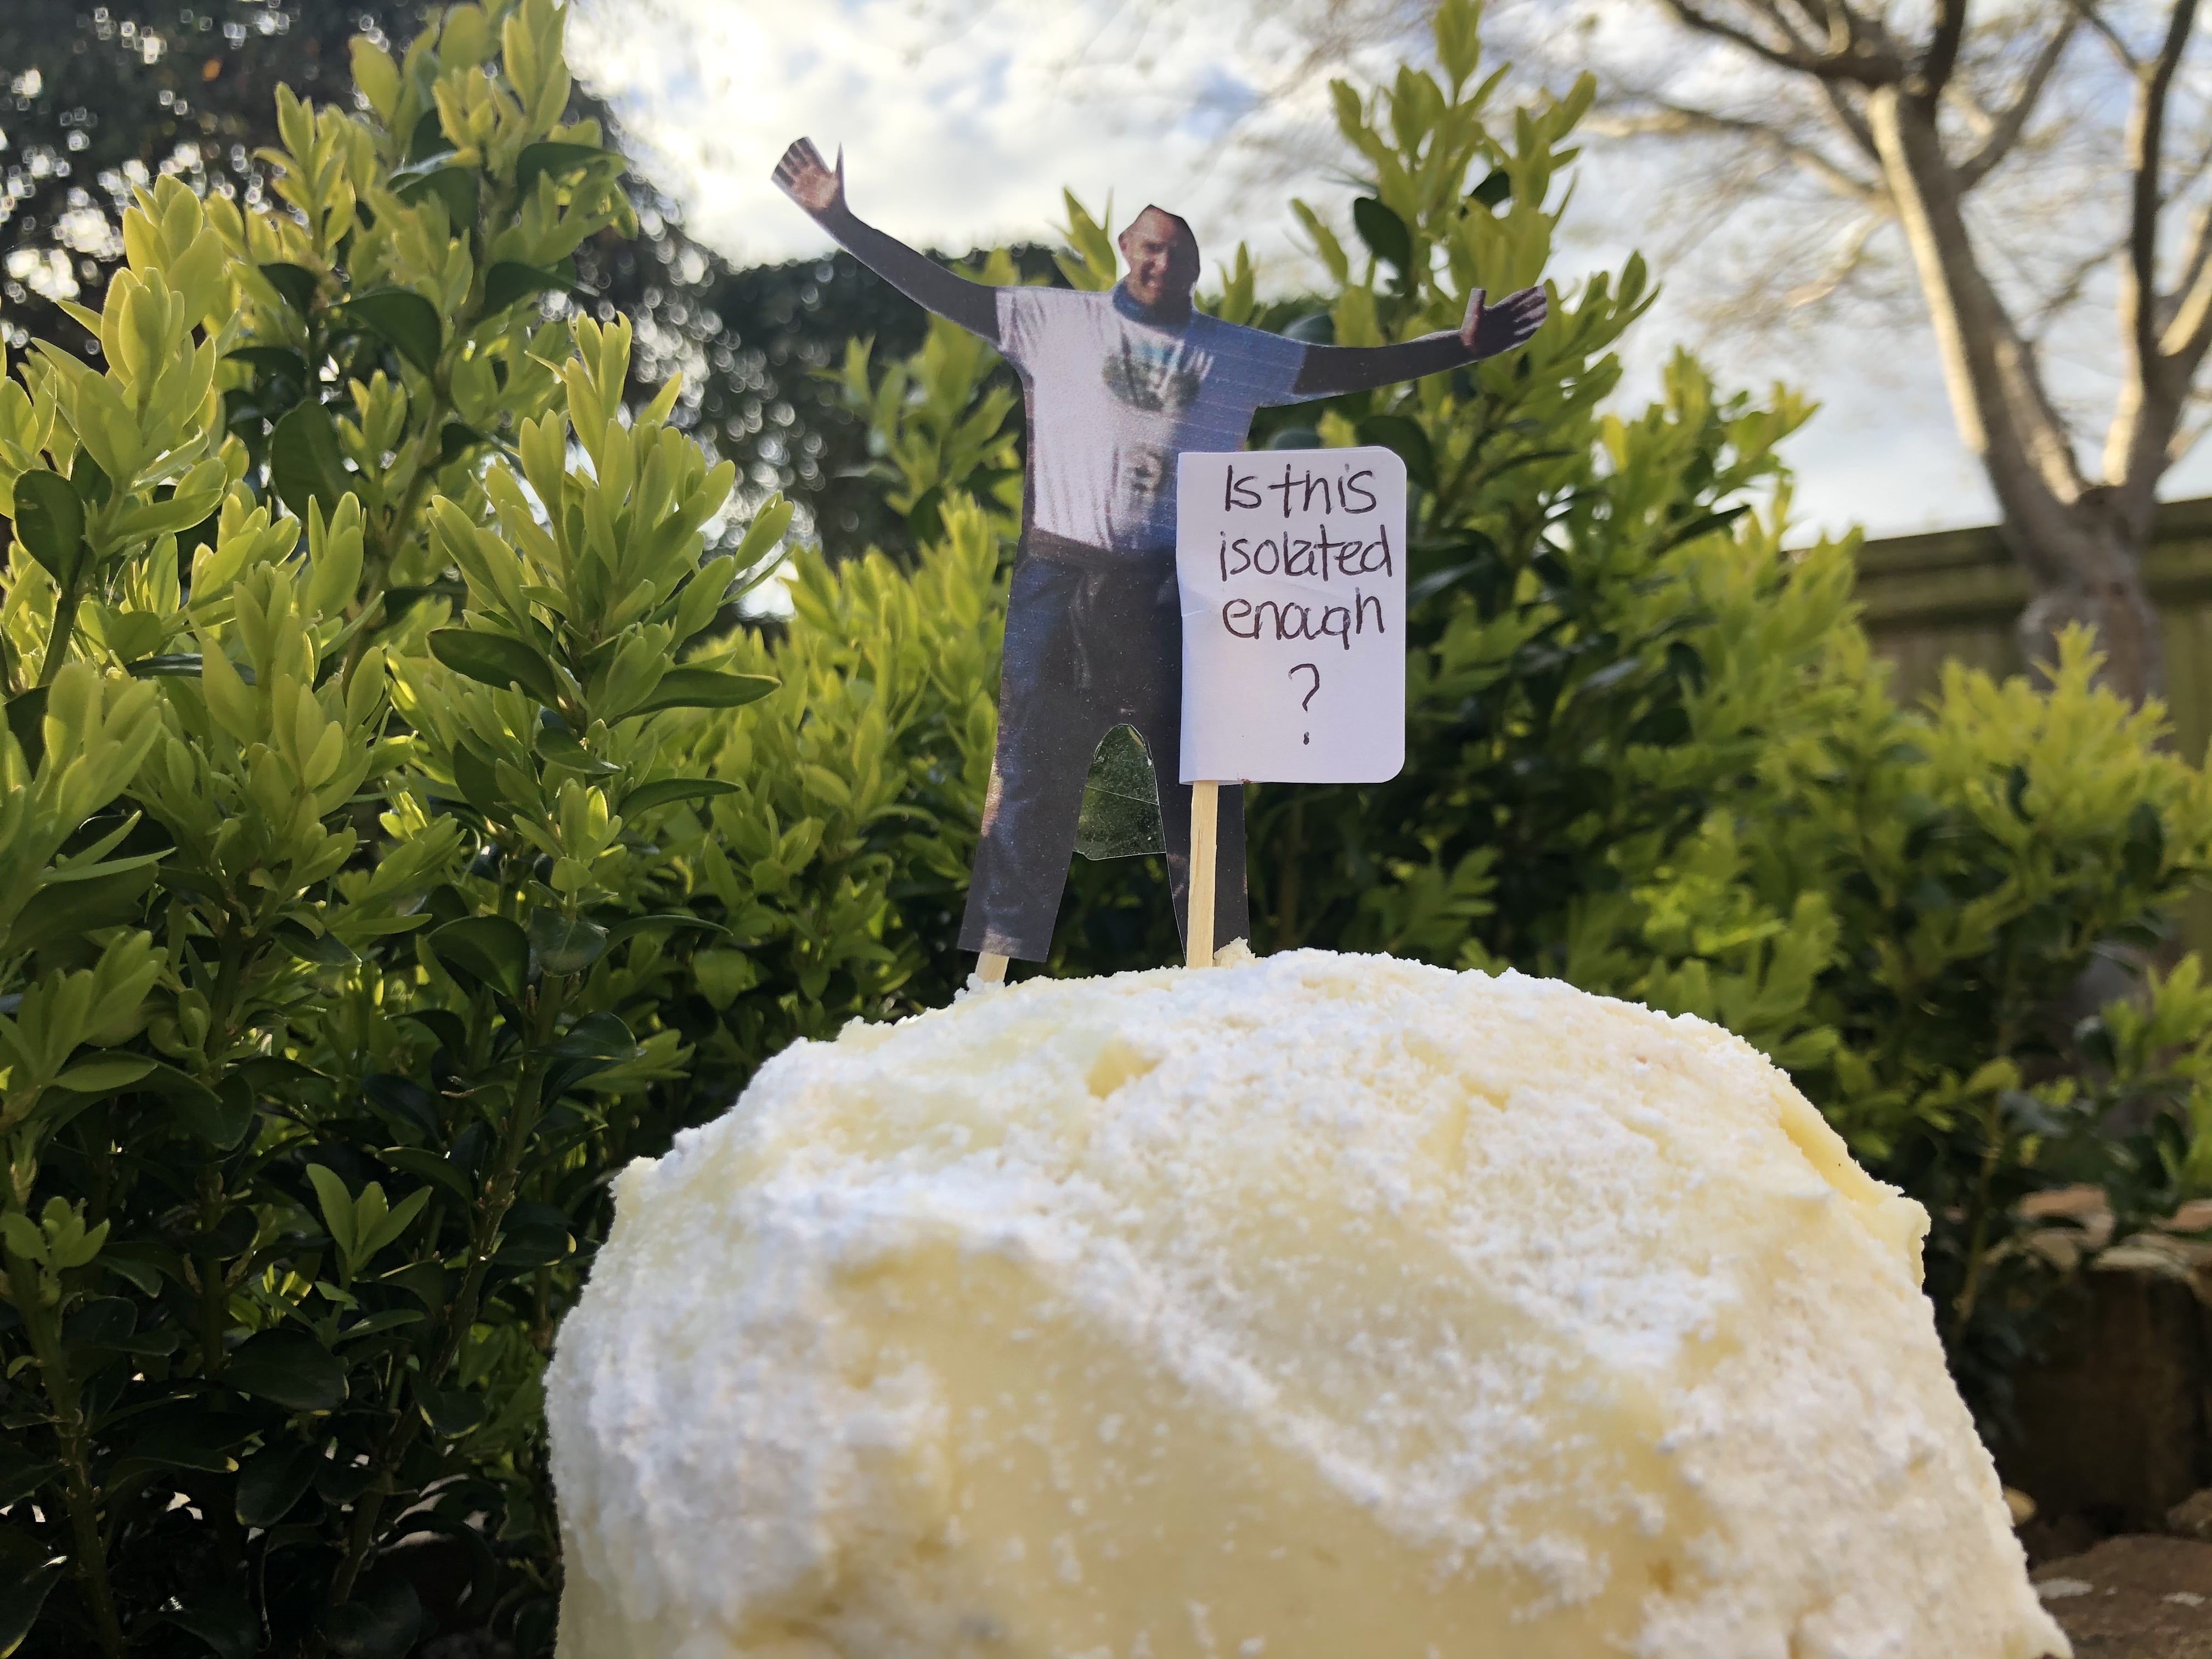 Mound of yellow Victoria Sponge Cake with icing sugar, a figure of a man on top and a sign that reads 'Is this isolated enough?' with a green bush in the background